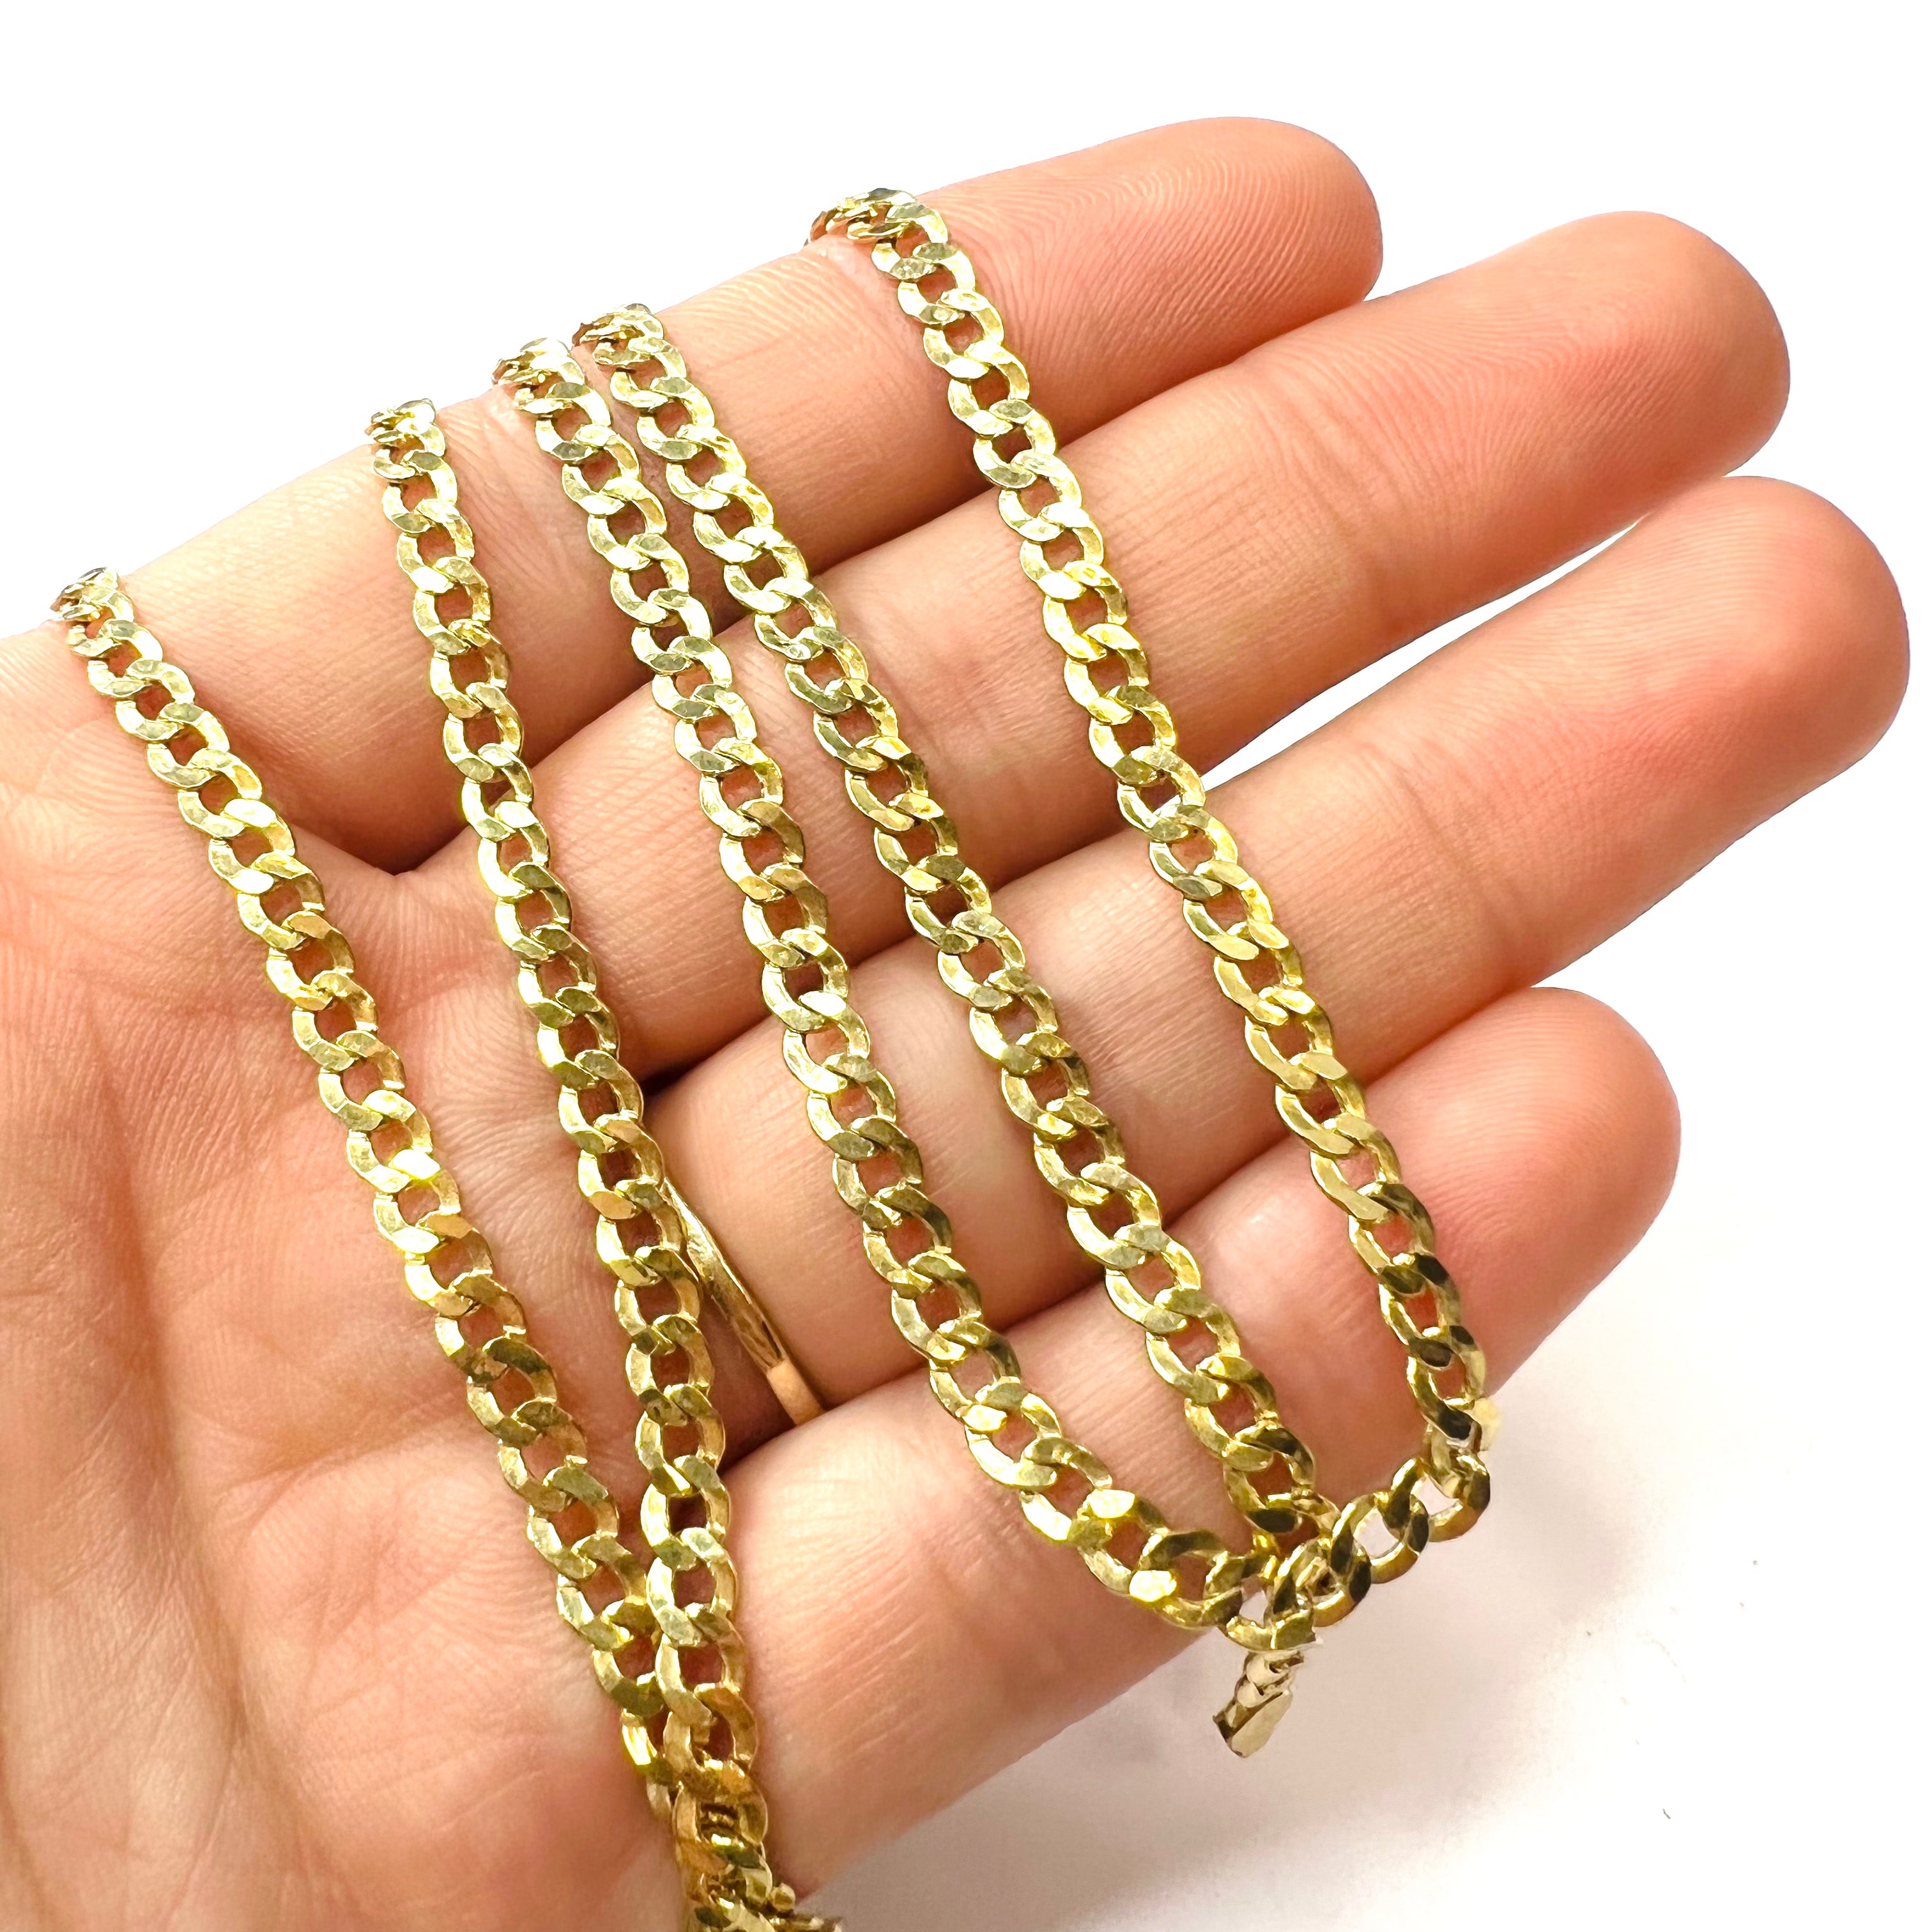 30" 4mm 10K Yellow Gold Cuban Link Chain Necklace